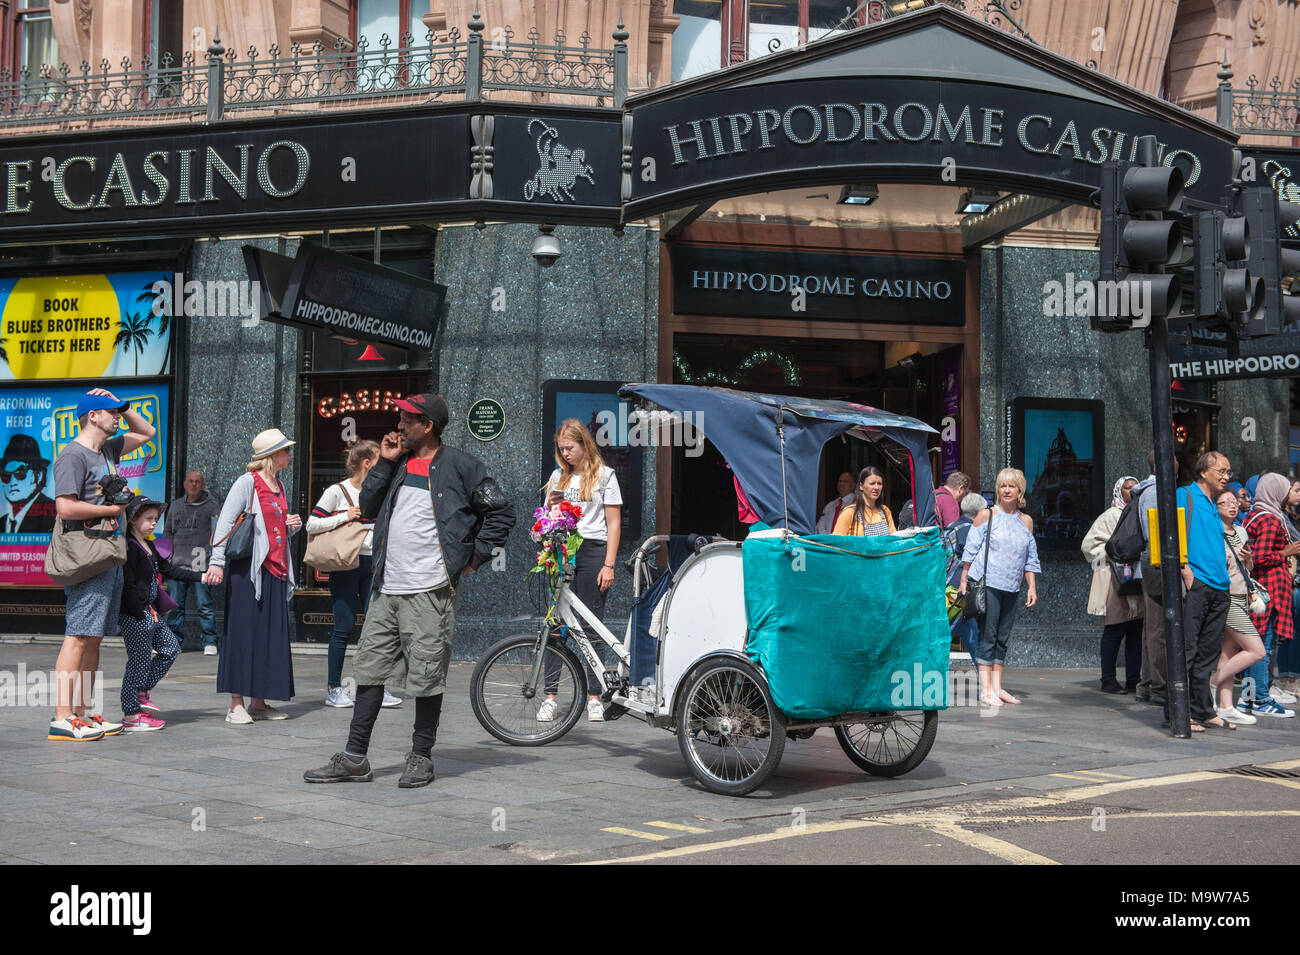 London. rickshaw in front of the Hippodrome Casino, Leicester Square. United Kingdom. Stock Photo